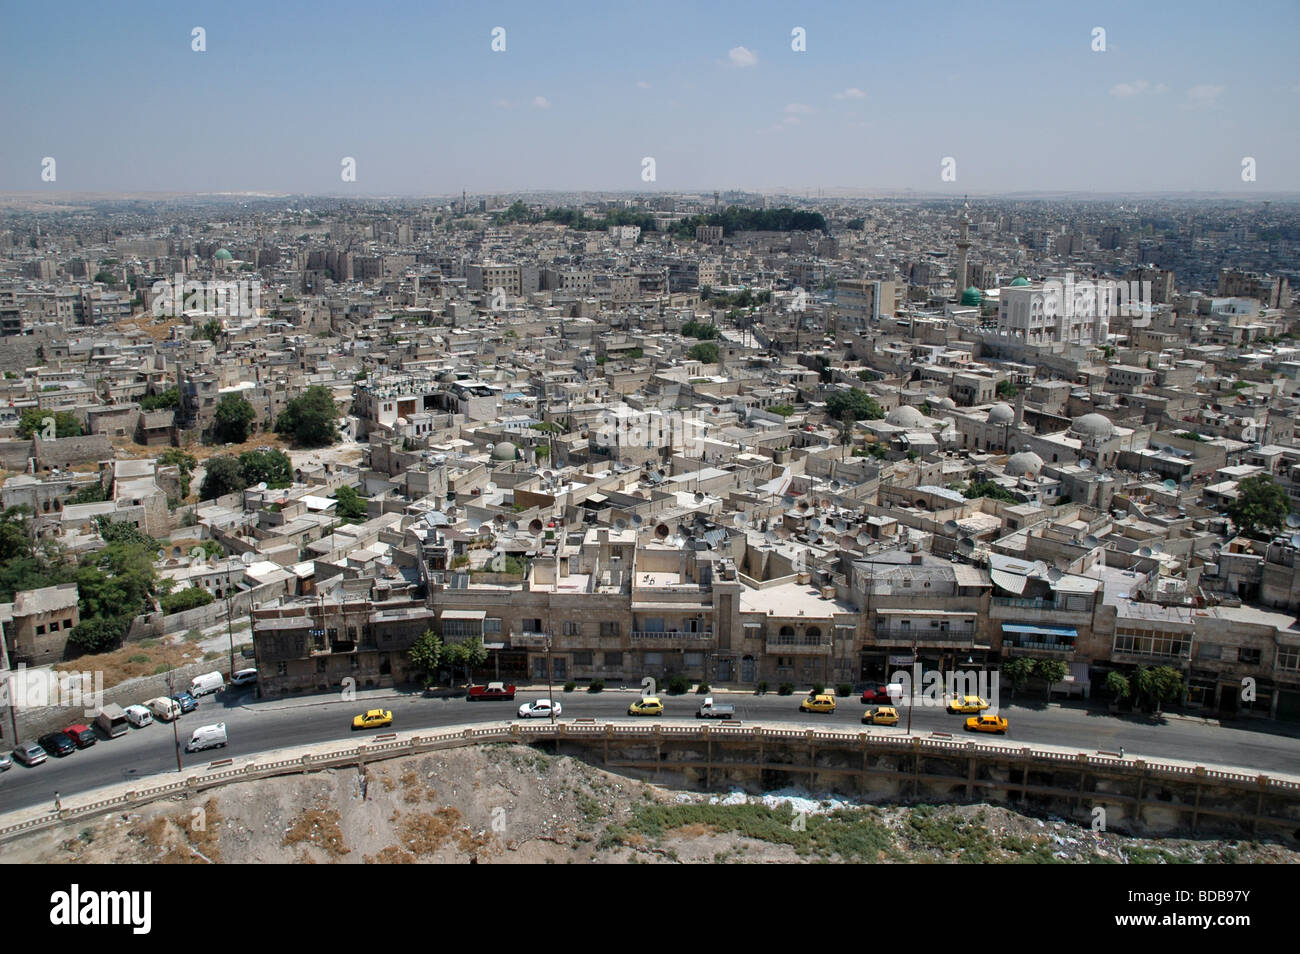 A view of urban sprawl in the Syrian city of Aleppo, as seen from its citadel, Syria. Stock Photo